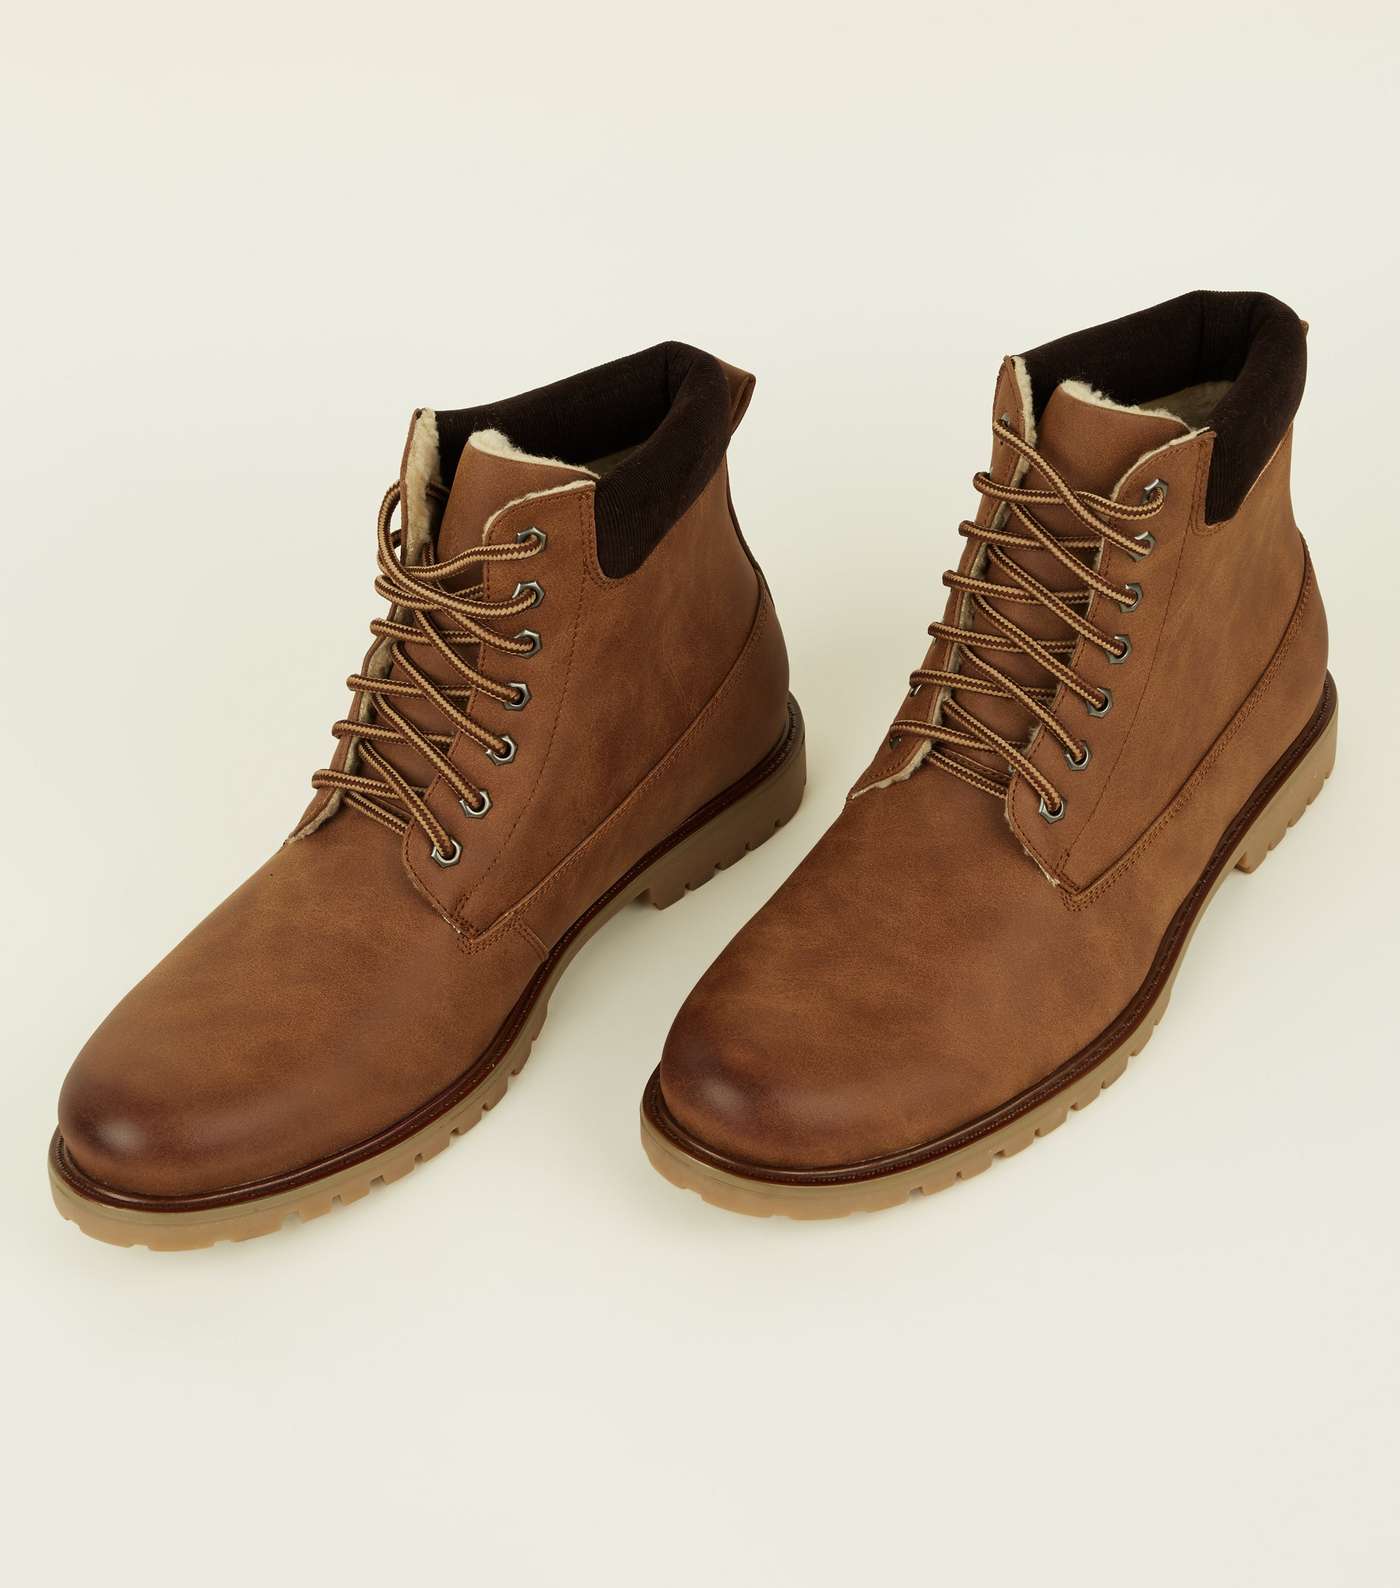 Tan Corduroy Trim Borg Lined Worker Boots  Image 4